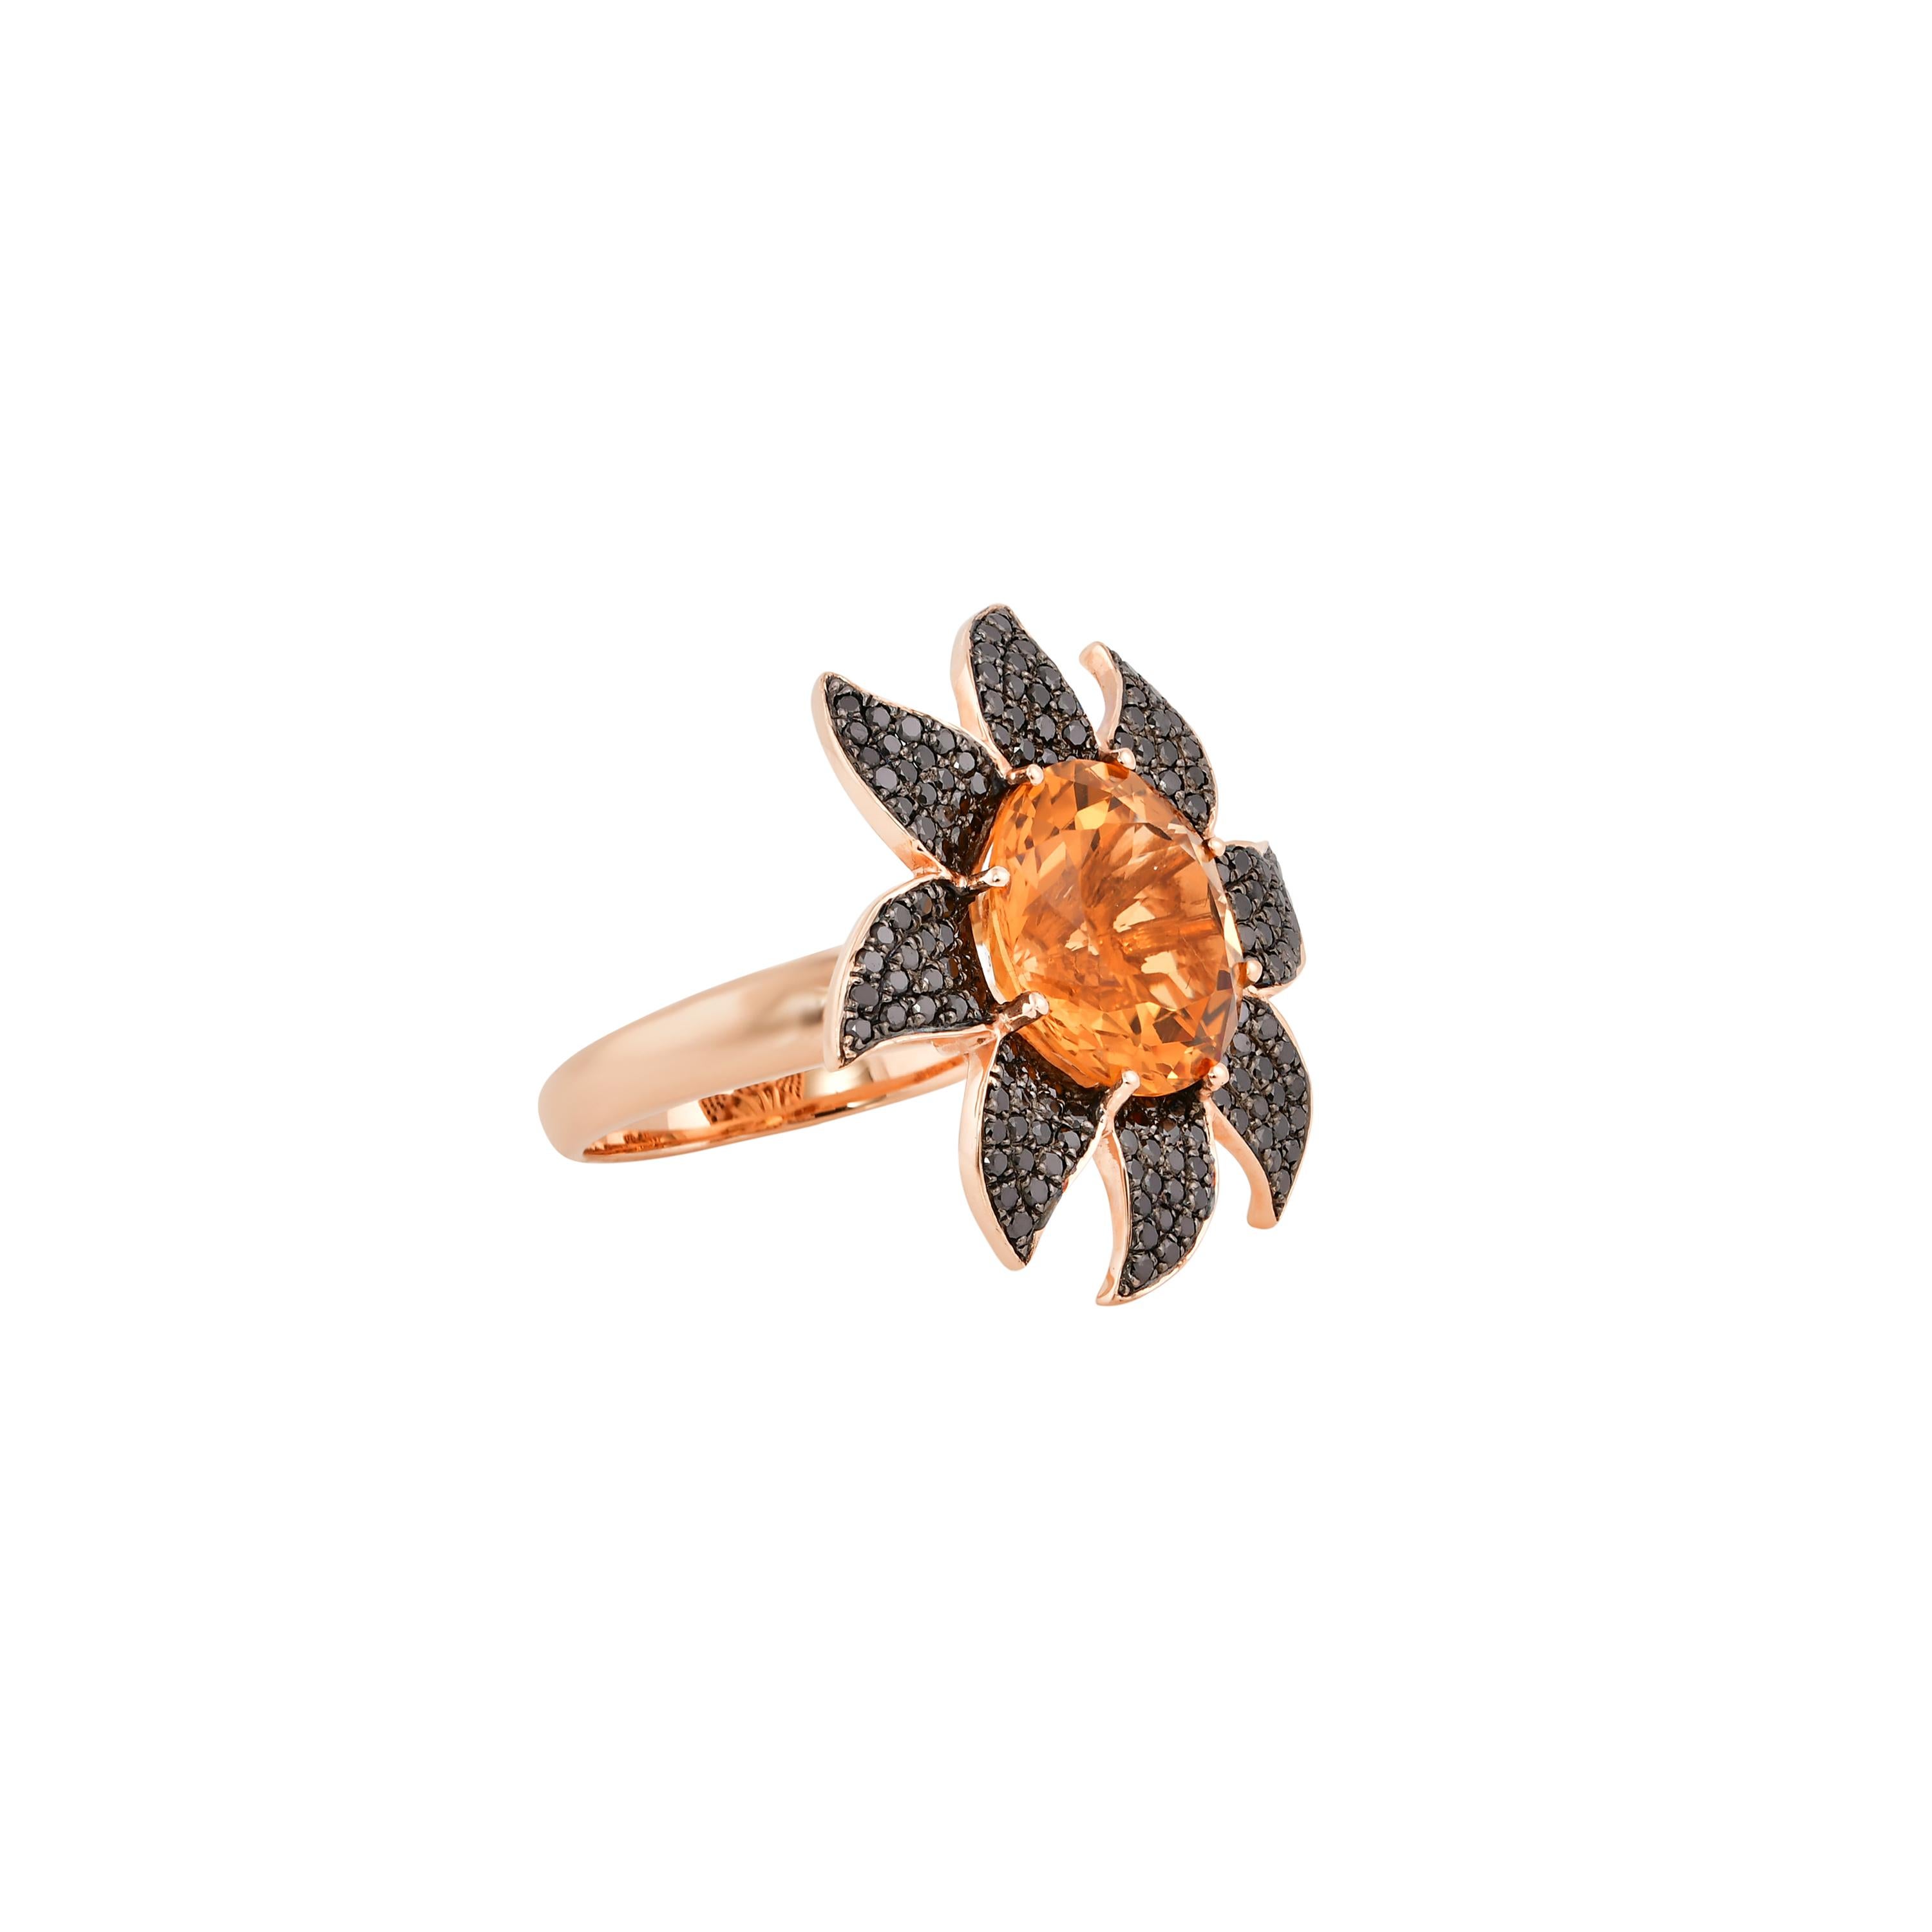 Glamorous Gemstones - Sunita Nahata started off her career as a gemstone trader, and this particular collection reflects her love for multi-colored semi-precious gemstones. This ring presents a cluster of the most captivating citrines accented with